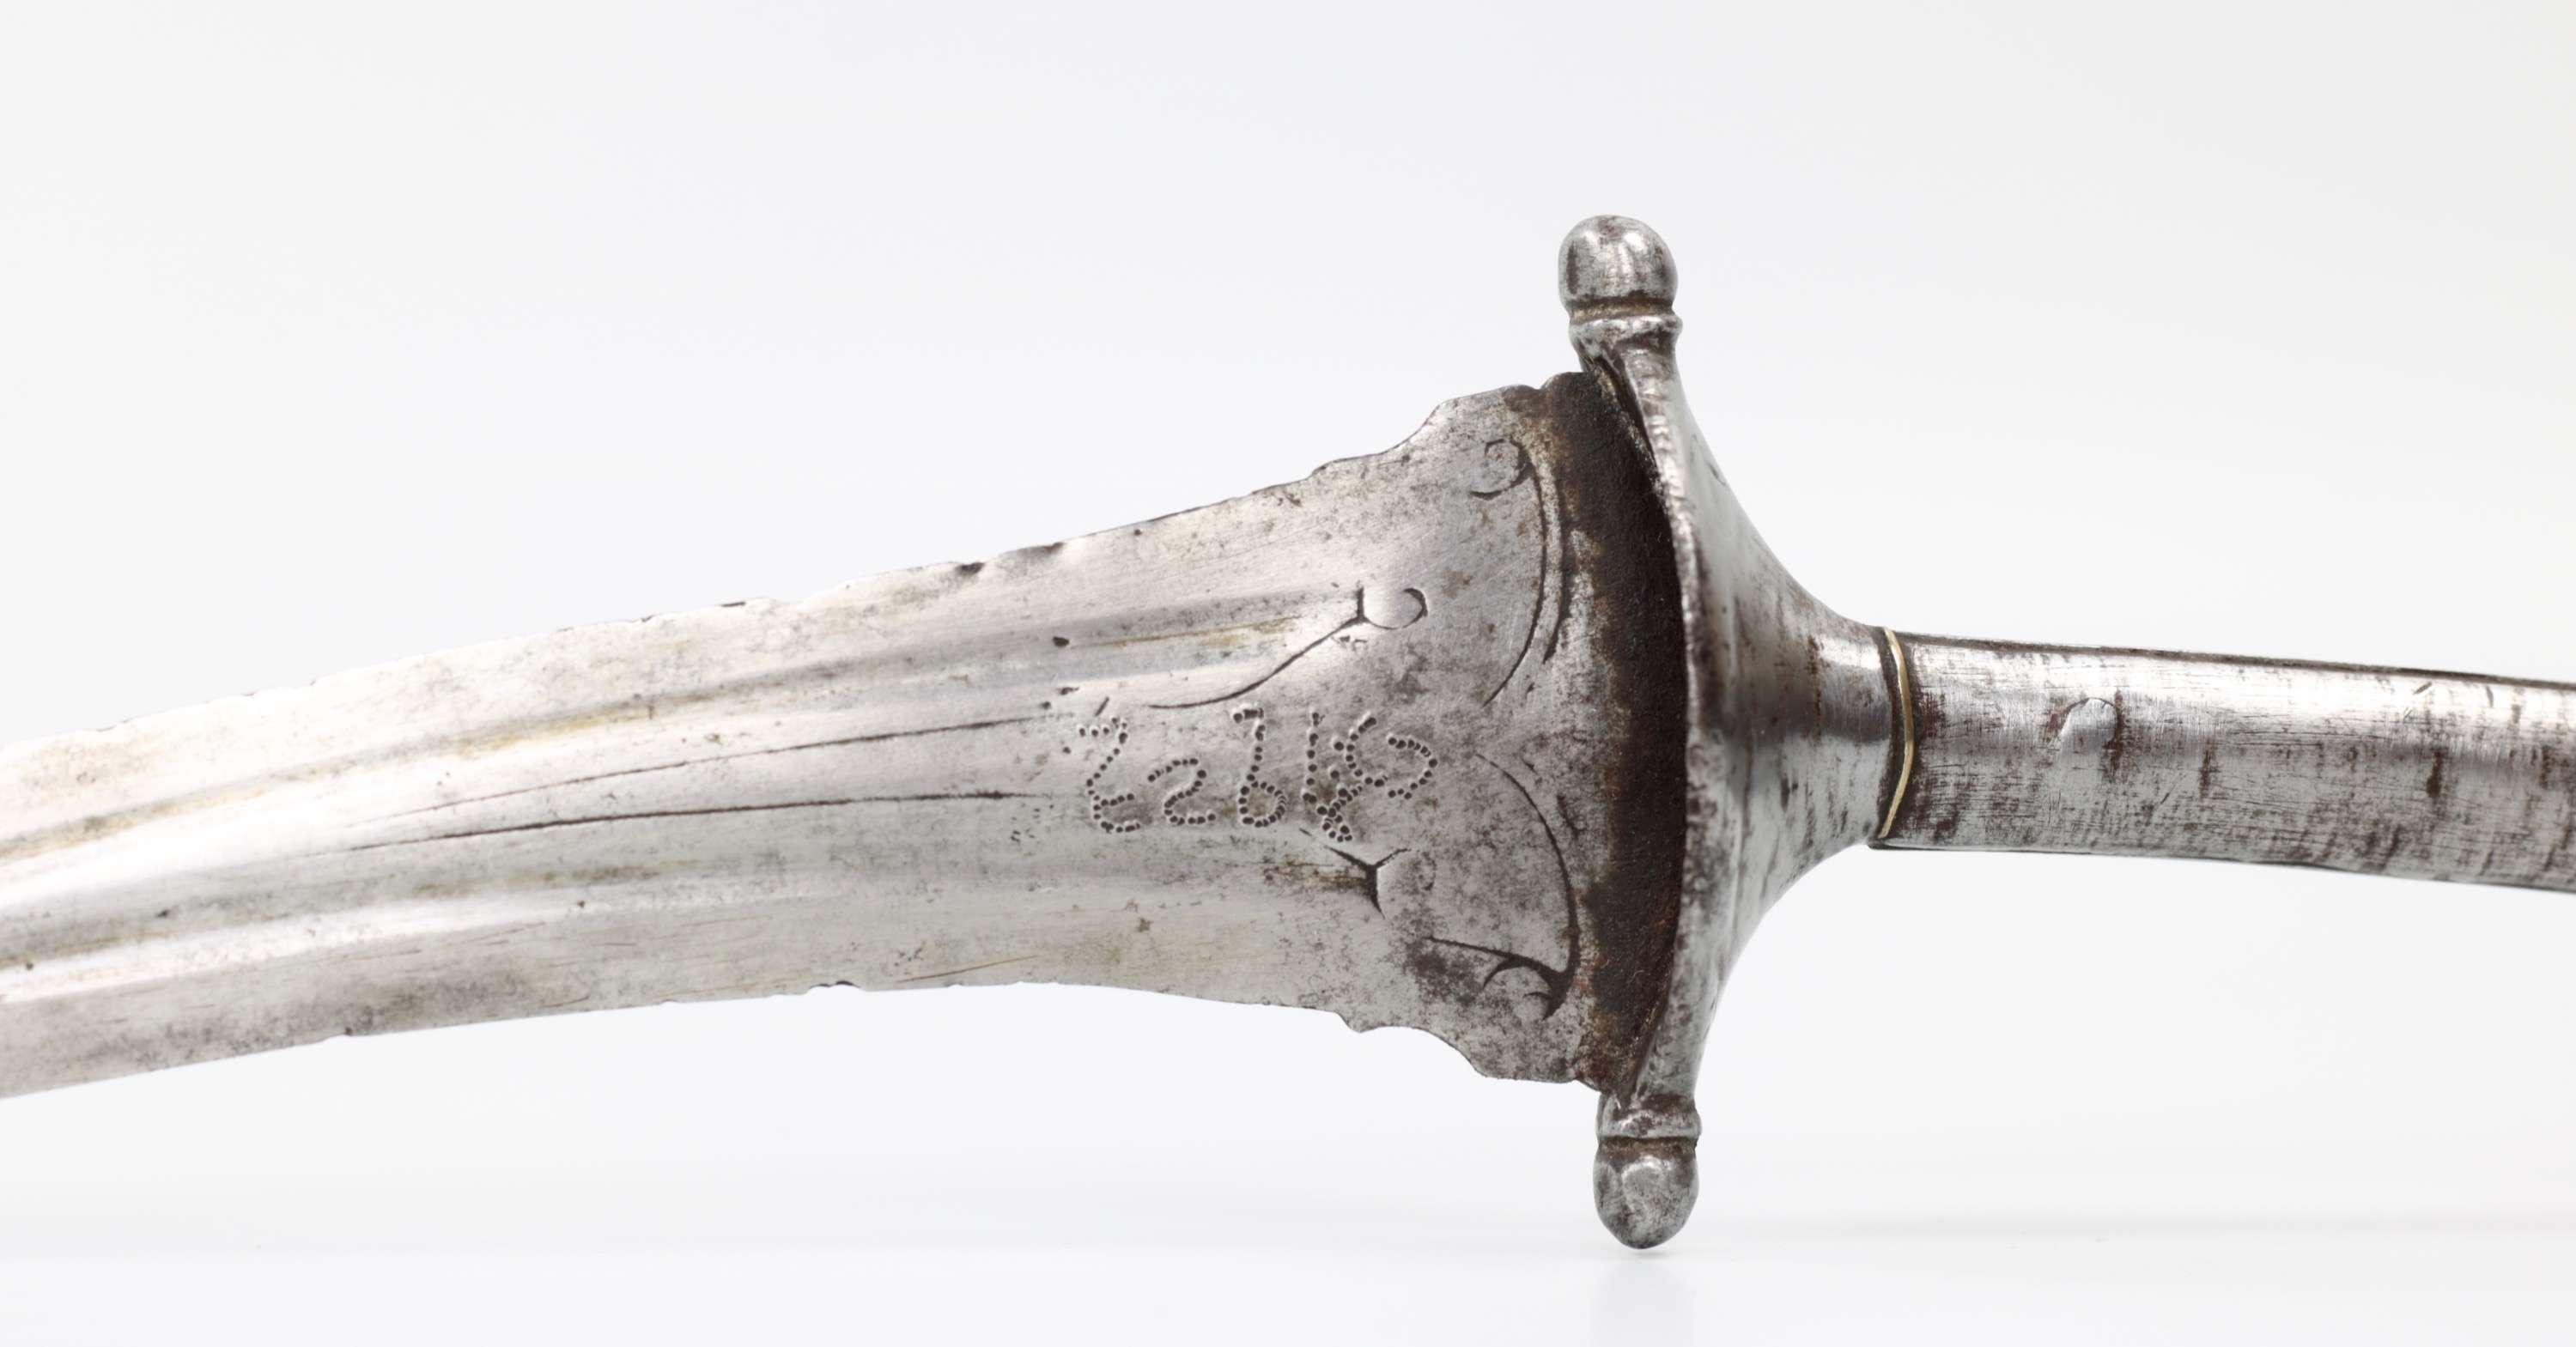 A small dagger from the Bikaner armory